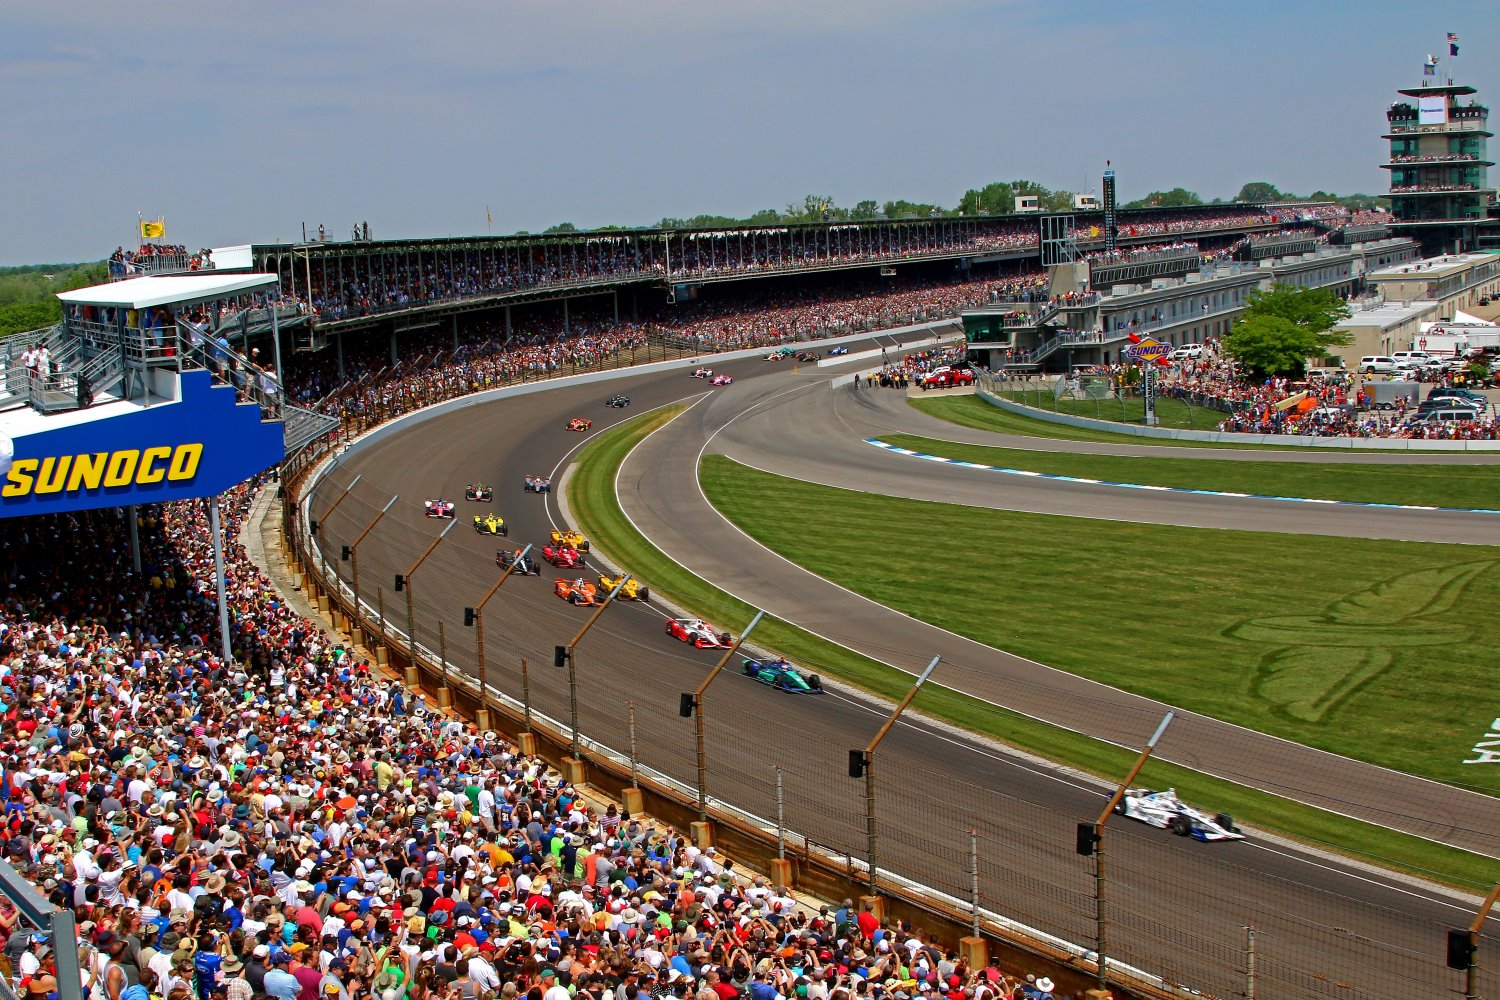 Indy 500 is the biggest race of all